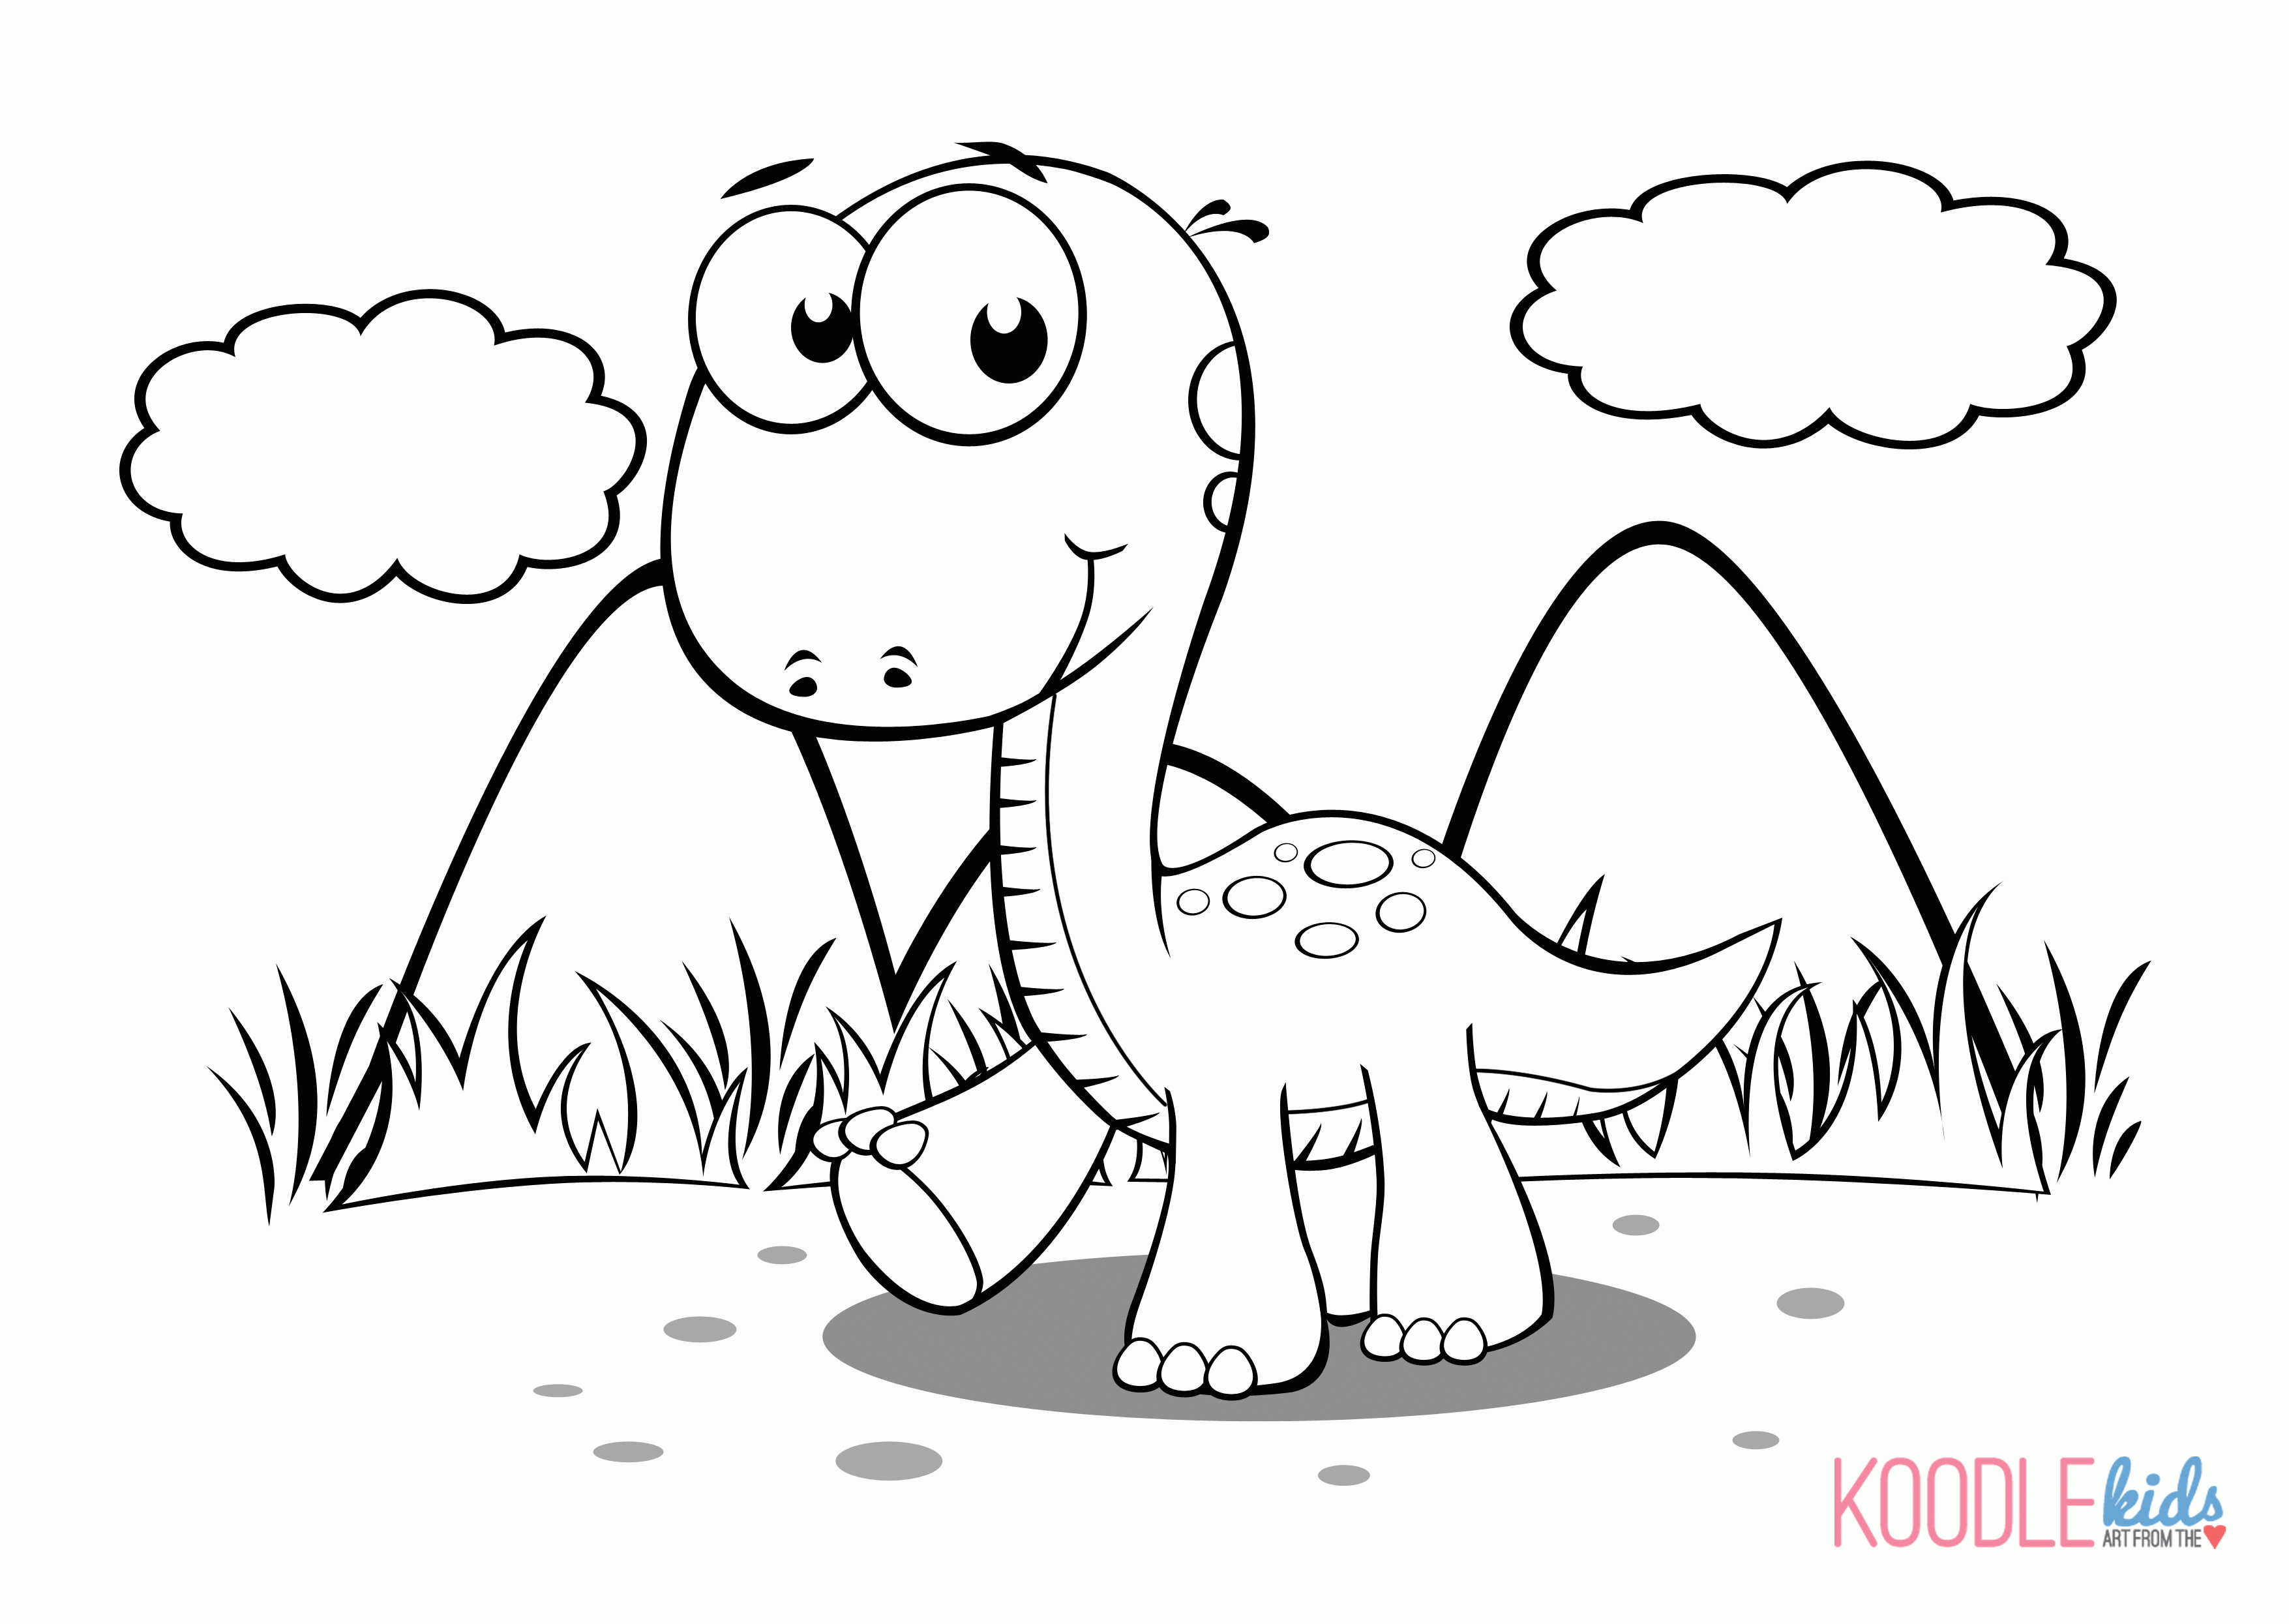 Easy Dinosaur Coloring Pages - Coloring Home